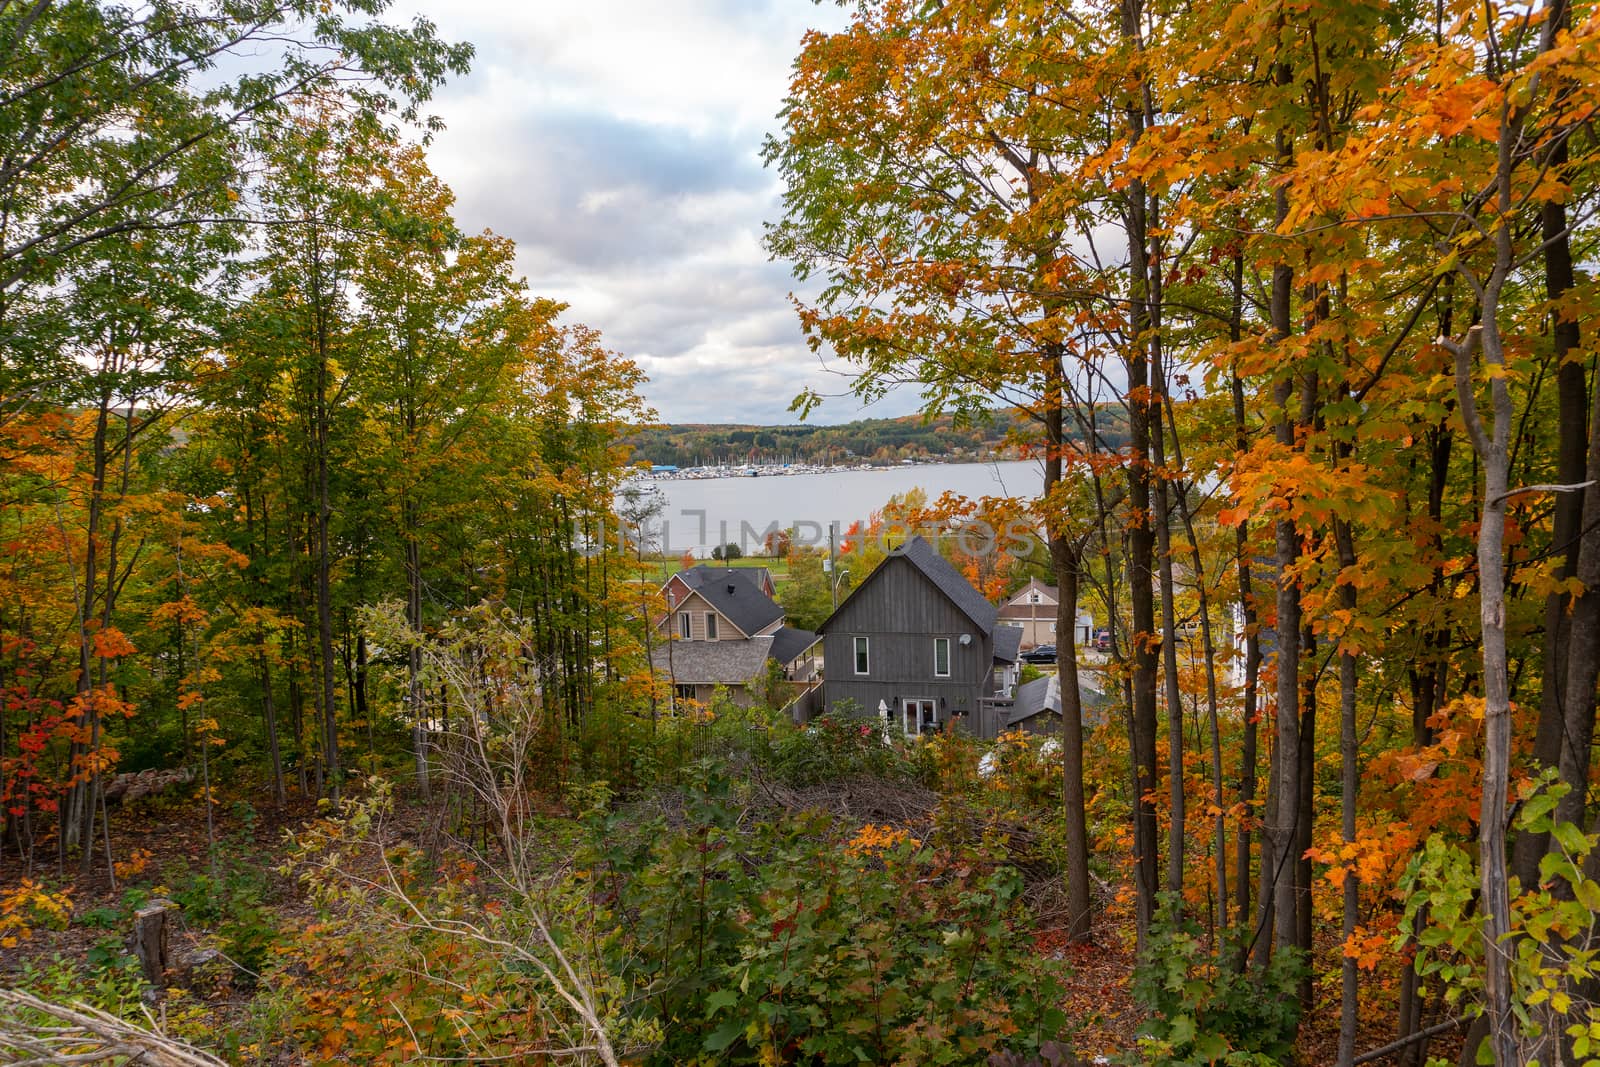 Houses in the autumn forest near the lake where yachts are visible on the pier. Photo taken from the top

